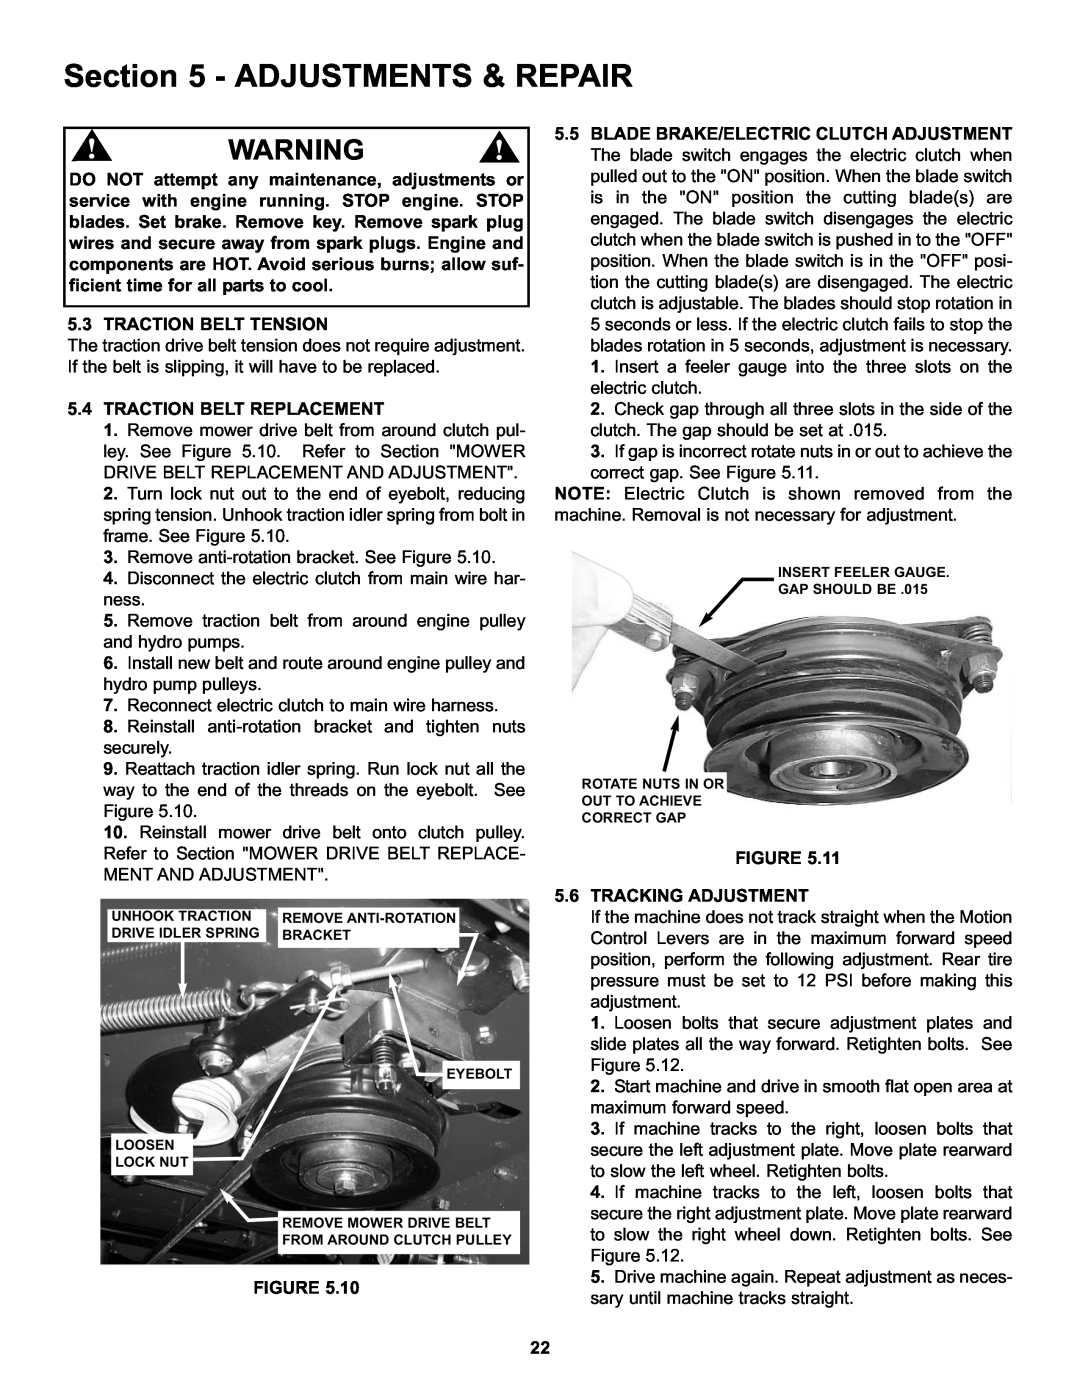 Snapper HZT21481BV Adjustments & Repair, Traction Belt Tension, 5.4TRACTION BELT REPLACEMENT, 6TRACKING ADJUSTMENT 